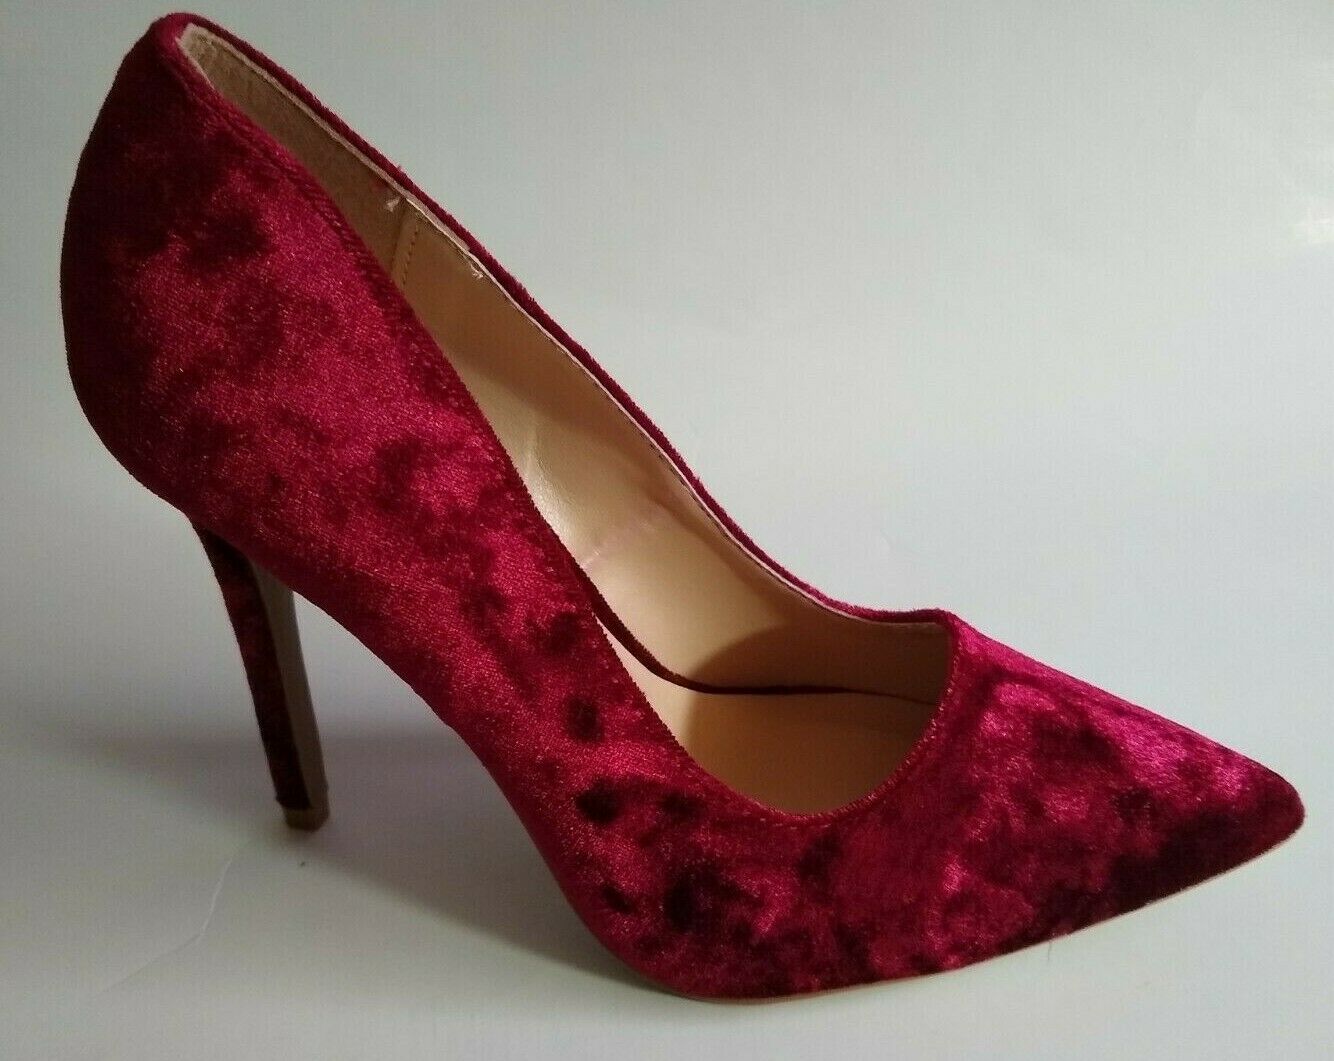 BRAND NEW QUPID Size 6 Red Wine Velvet Pointed Toe High Heel Pumps Shoes